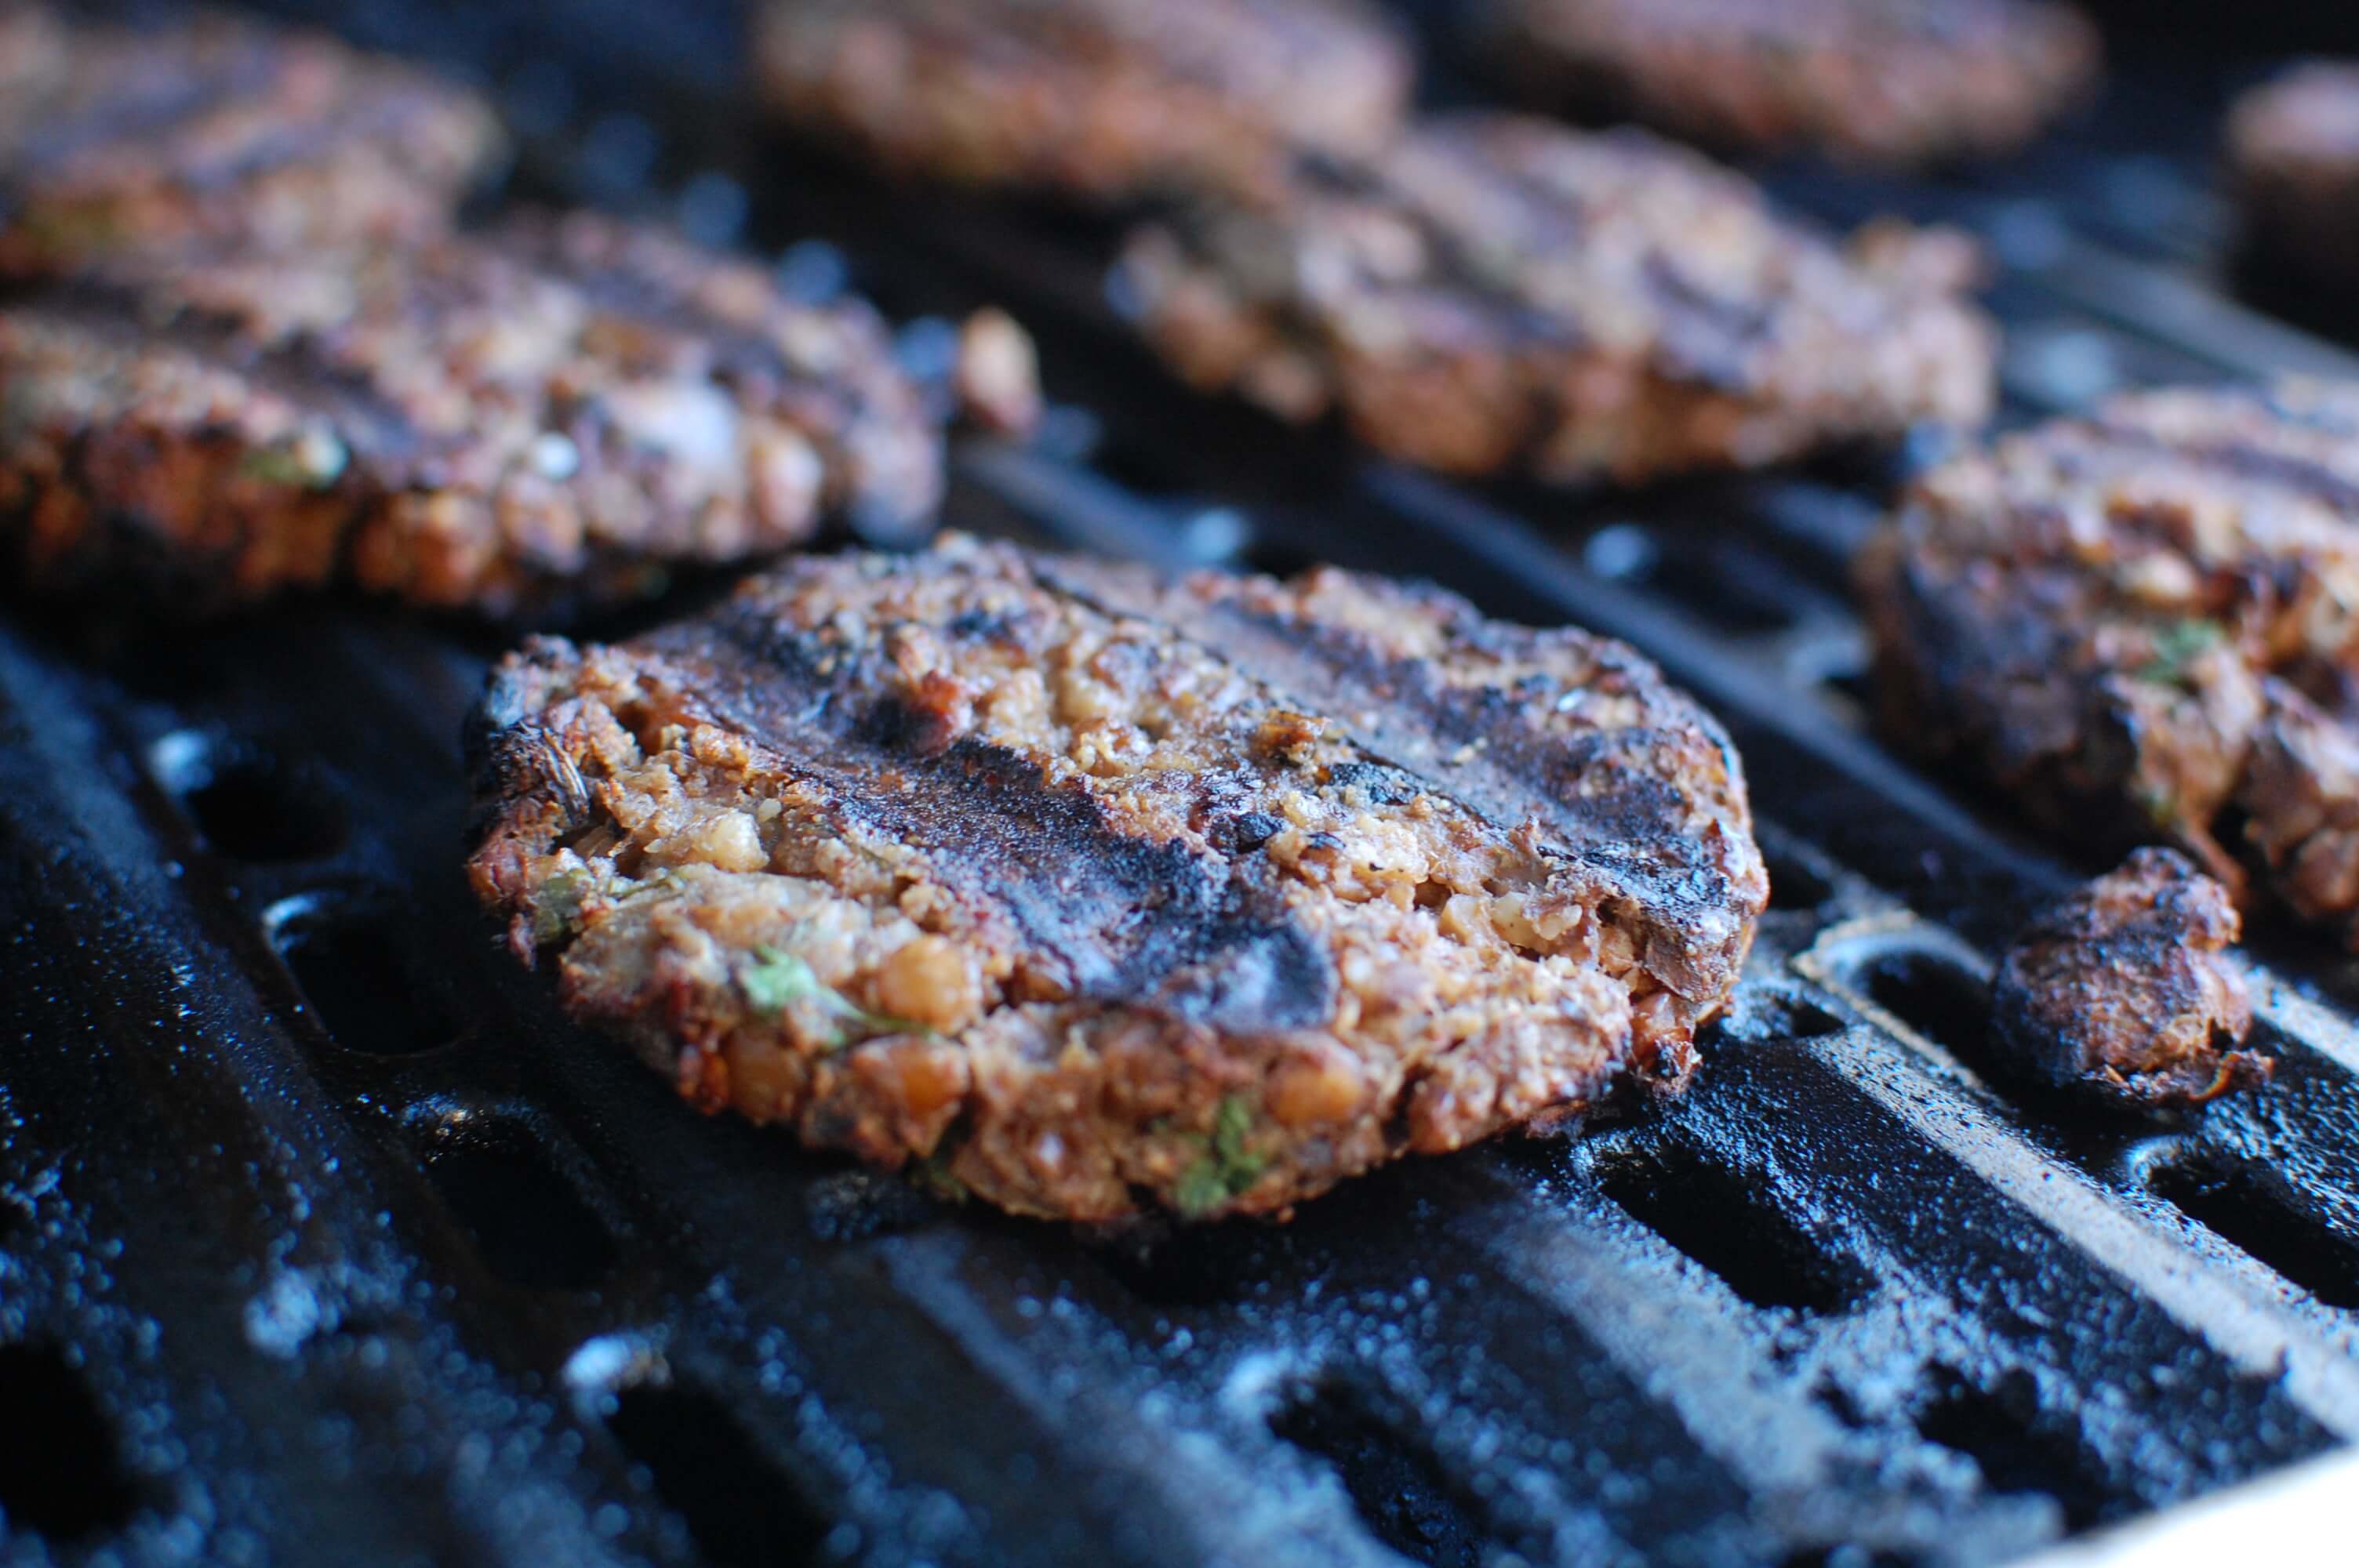 20 Meal Ideas Your Clients Can Grill This Summer: Mushroom Lentil Burgers